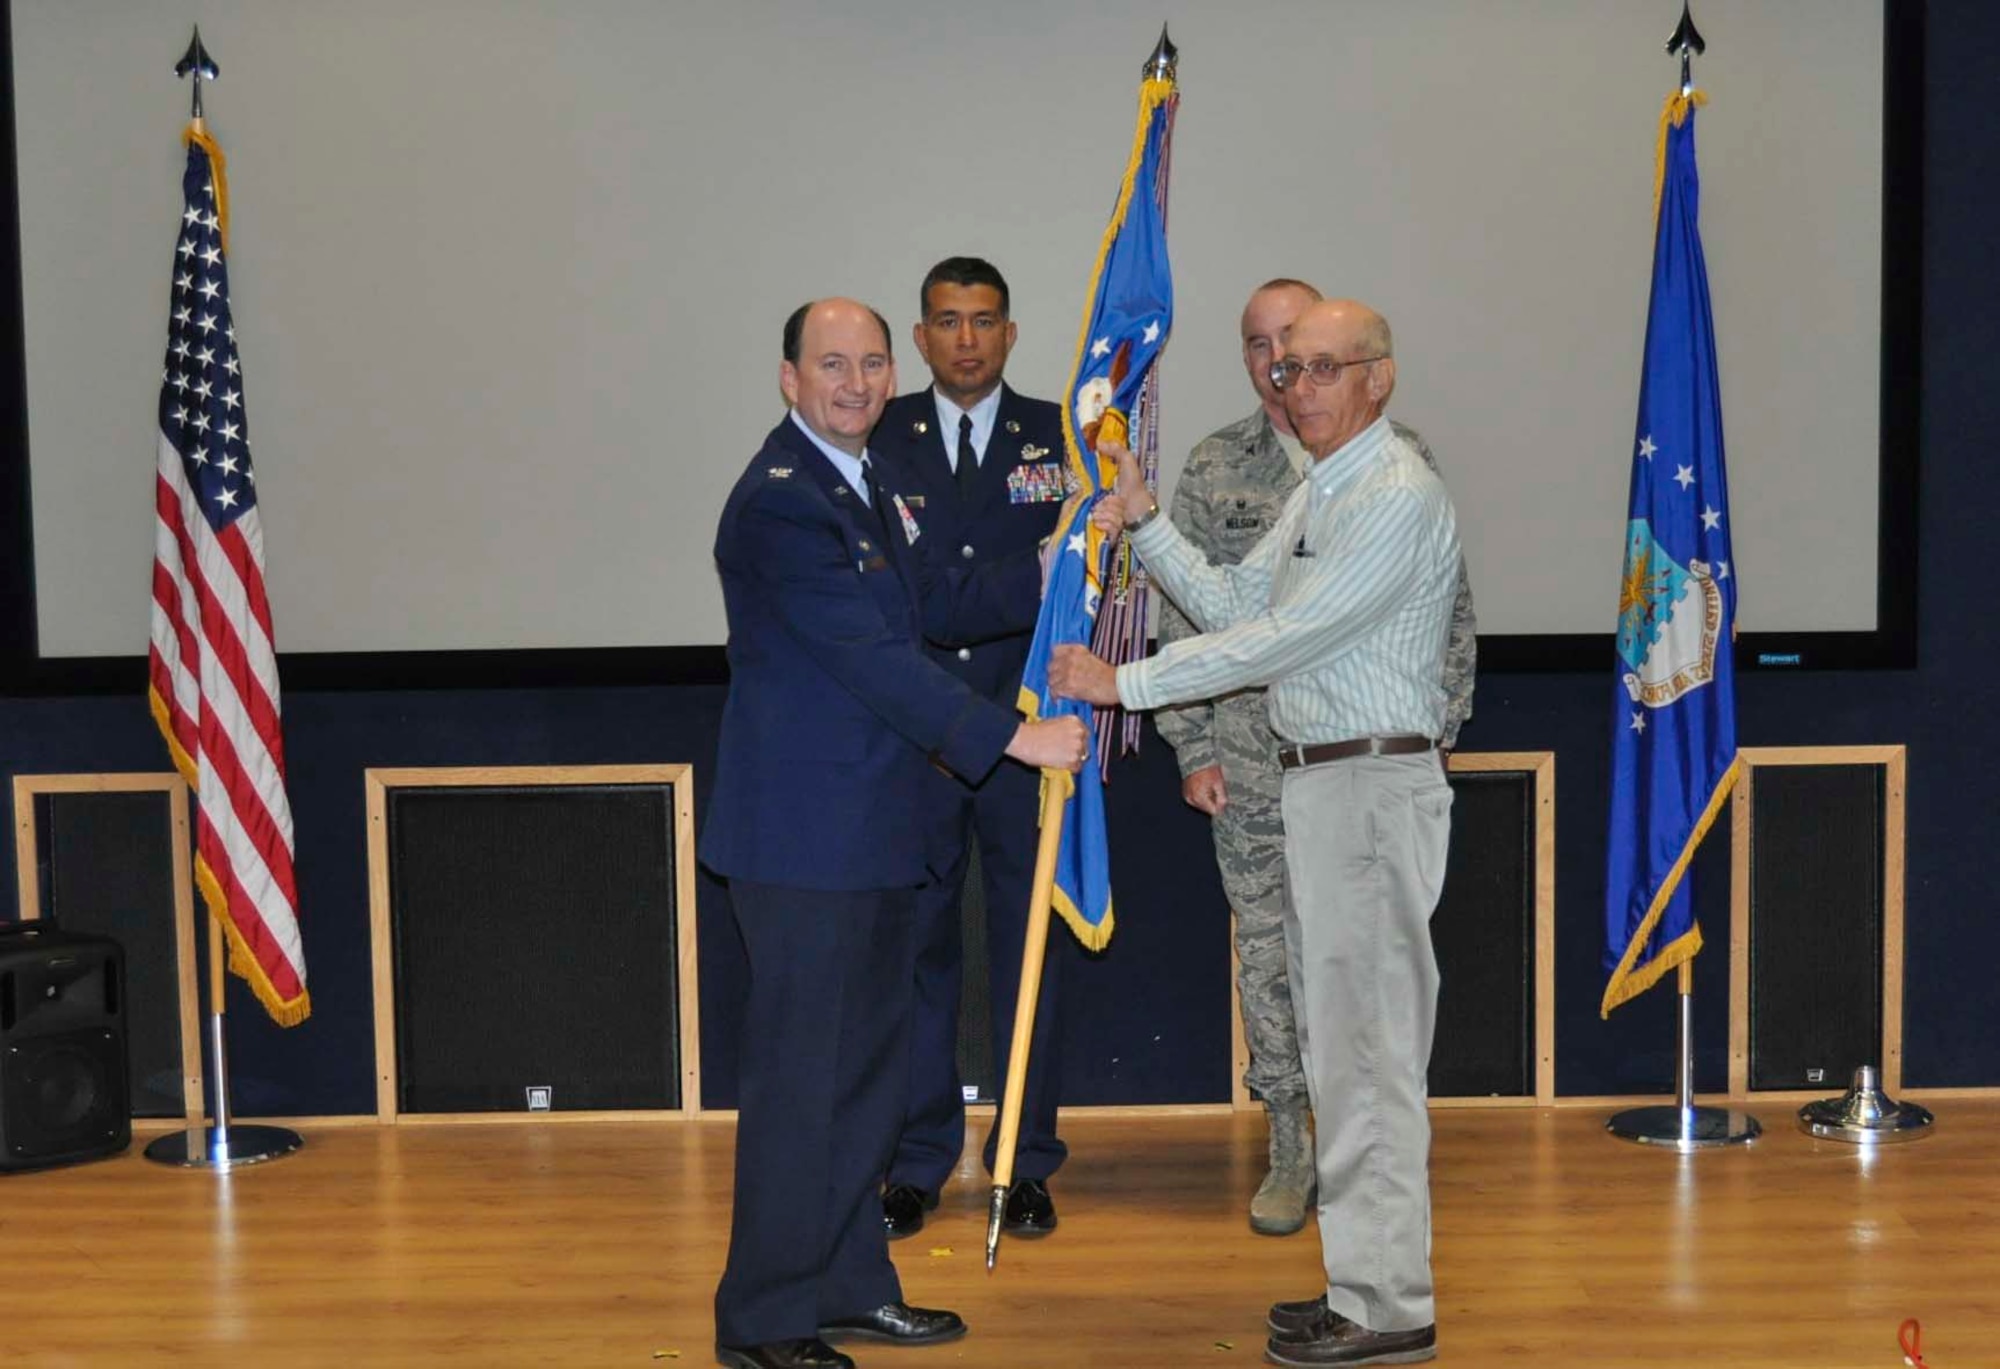 Arnold Dollase accepts the 433rd Airlift Wing guidon from Col. Thomas K. Smith, Jr., 433rd AW commander, during the Honorary Commanders Induction Ceremony held at Joint Base San Antonio-Lackland April 30, 2016. Dollase is the president of the Castroville Area Economic Development Council and will be serving as the 433rd Medical Squadron Honorary Commander. (U.S. Air Force photo/Senior Airman Bryan Swink)